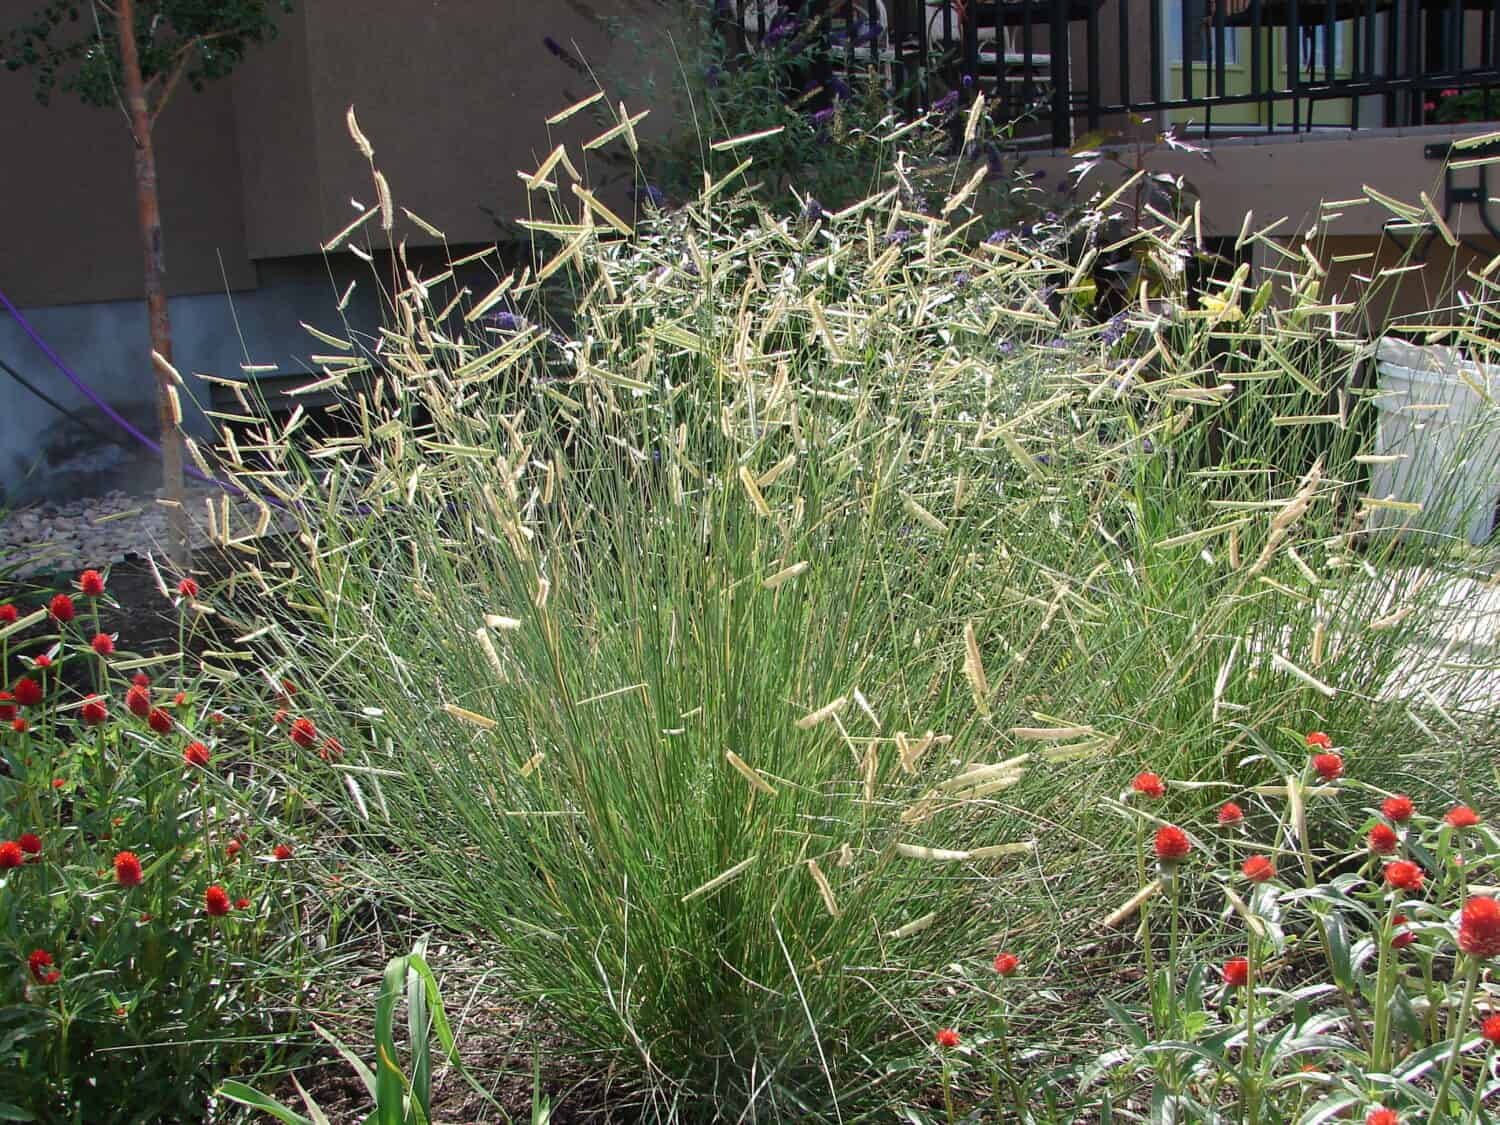 Bouteloua gracilis - blonde ambition. This is a beautiful ornamental grass that works well for Zone 4 gardens. 